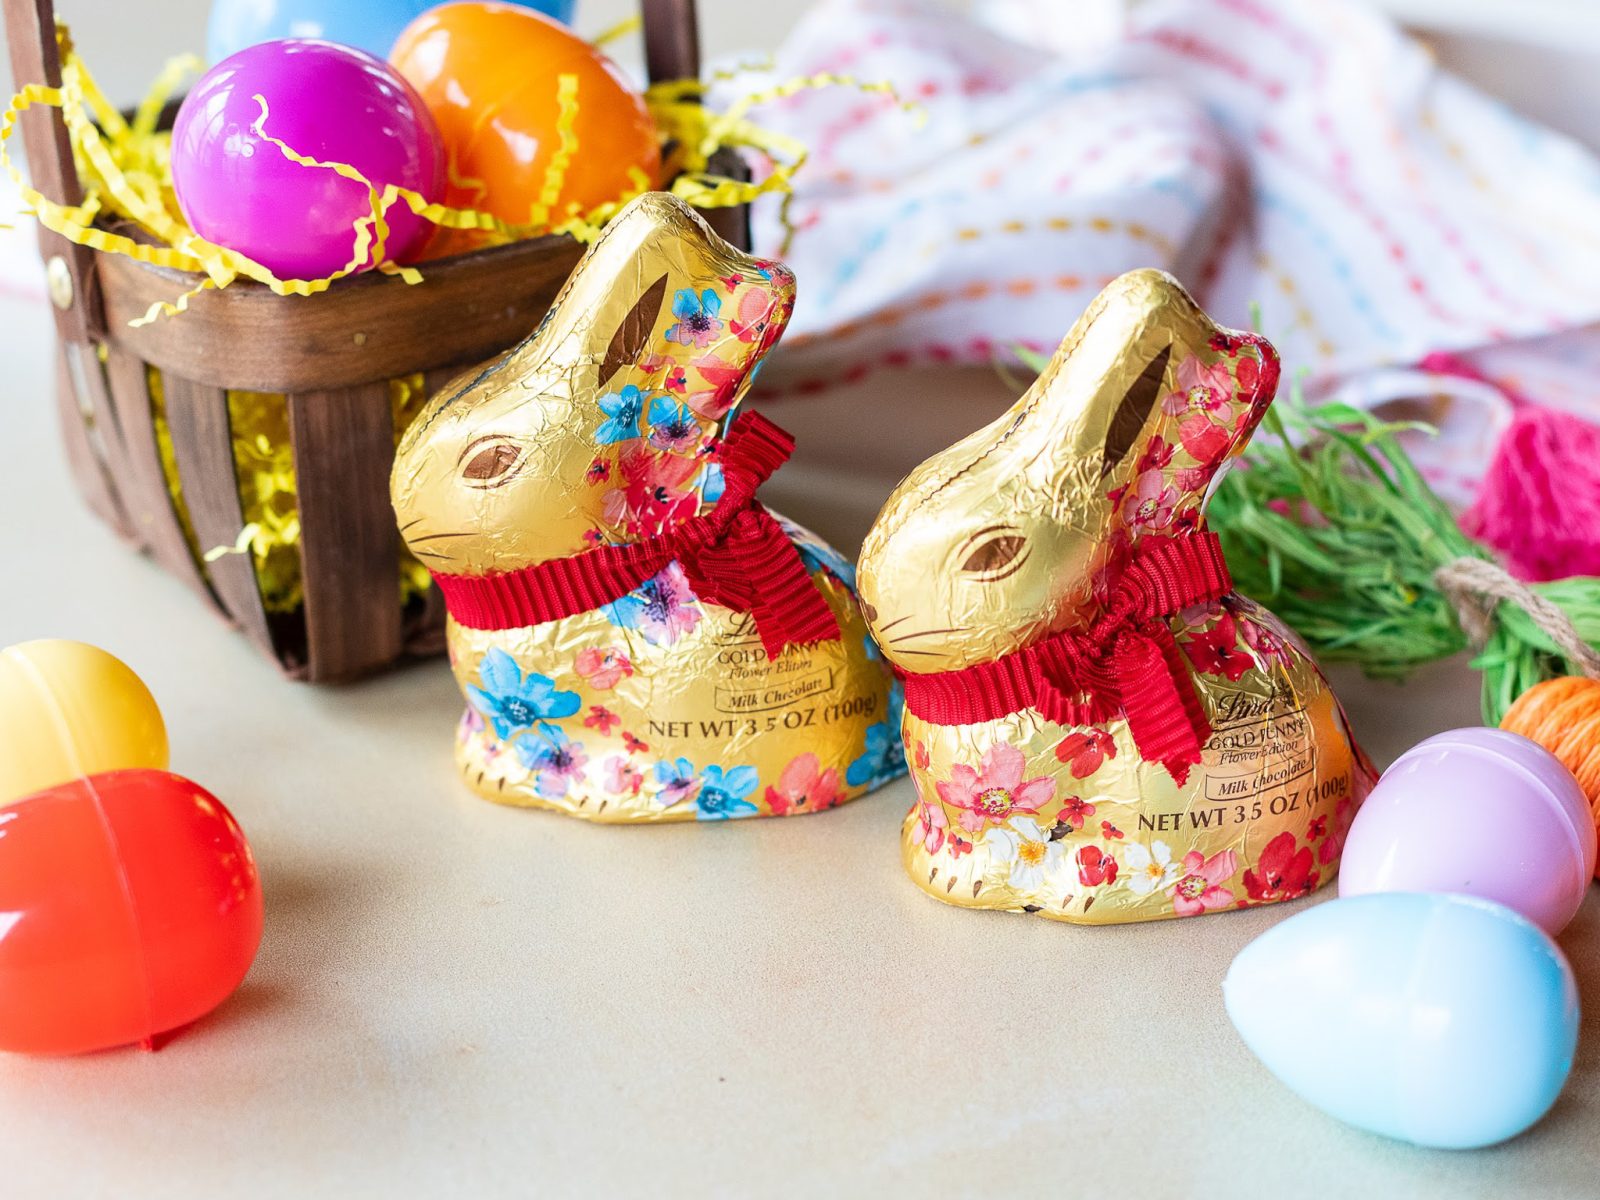 Lindt Chocolate Bunny Just $3.49 At Kroger – Save $2